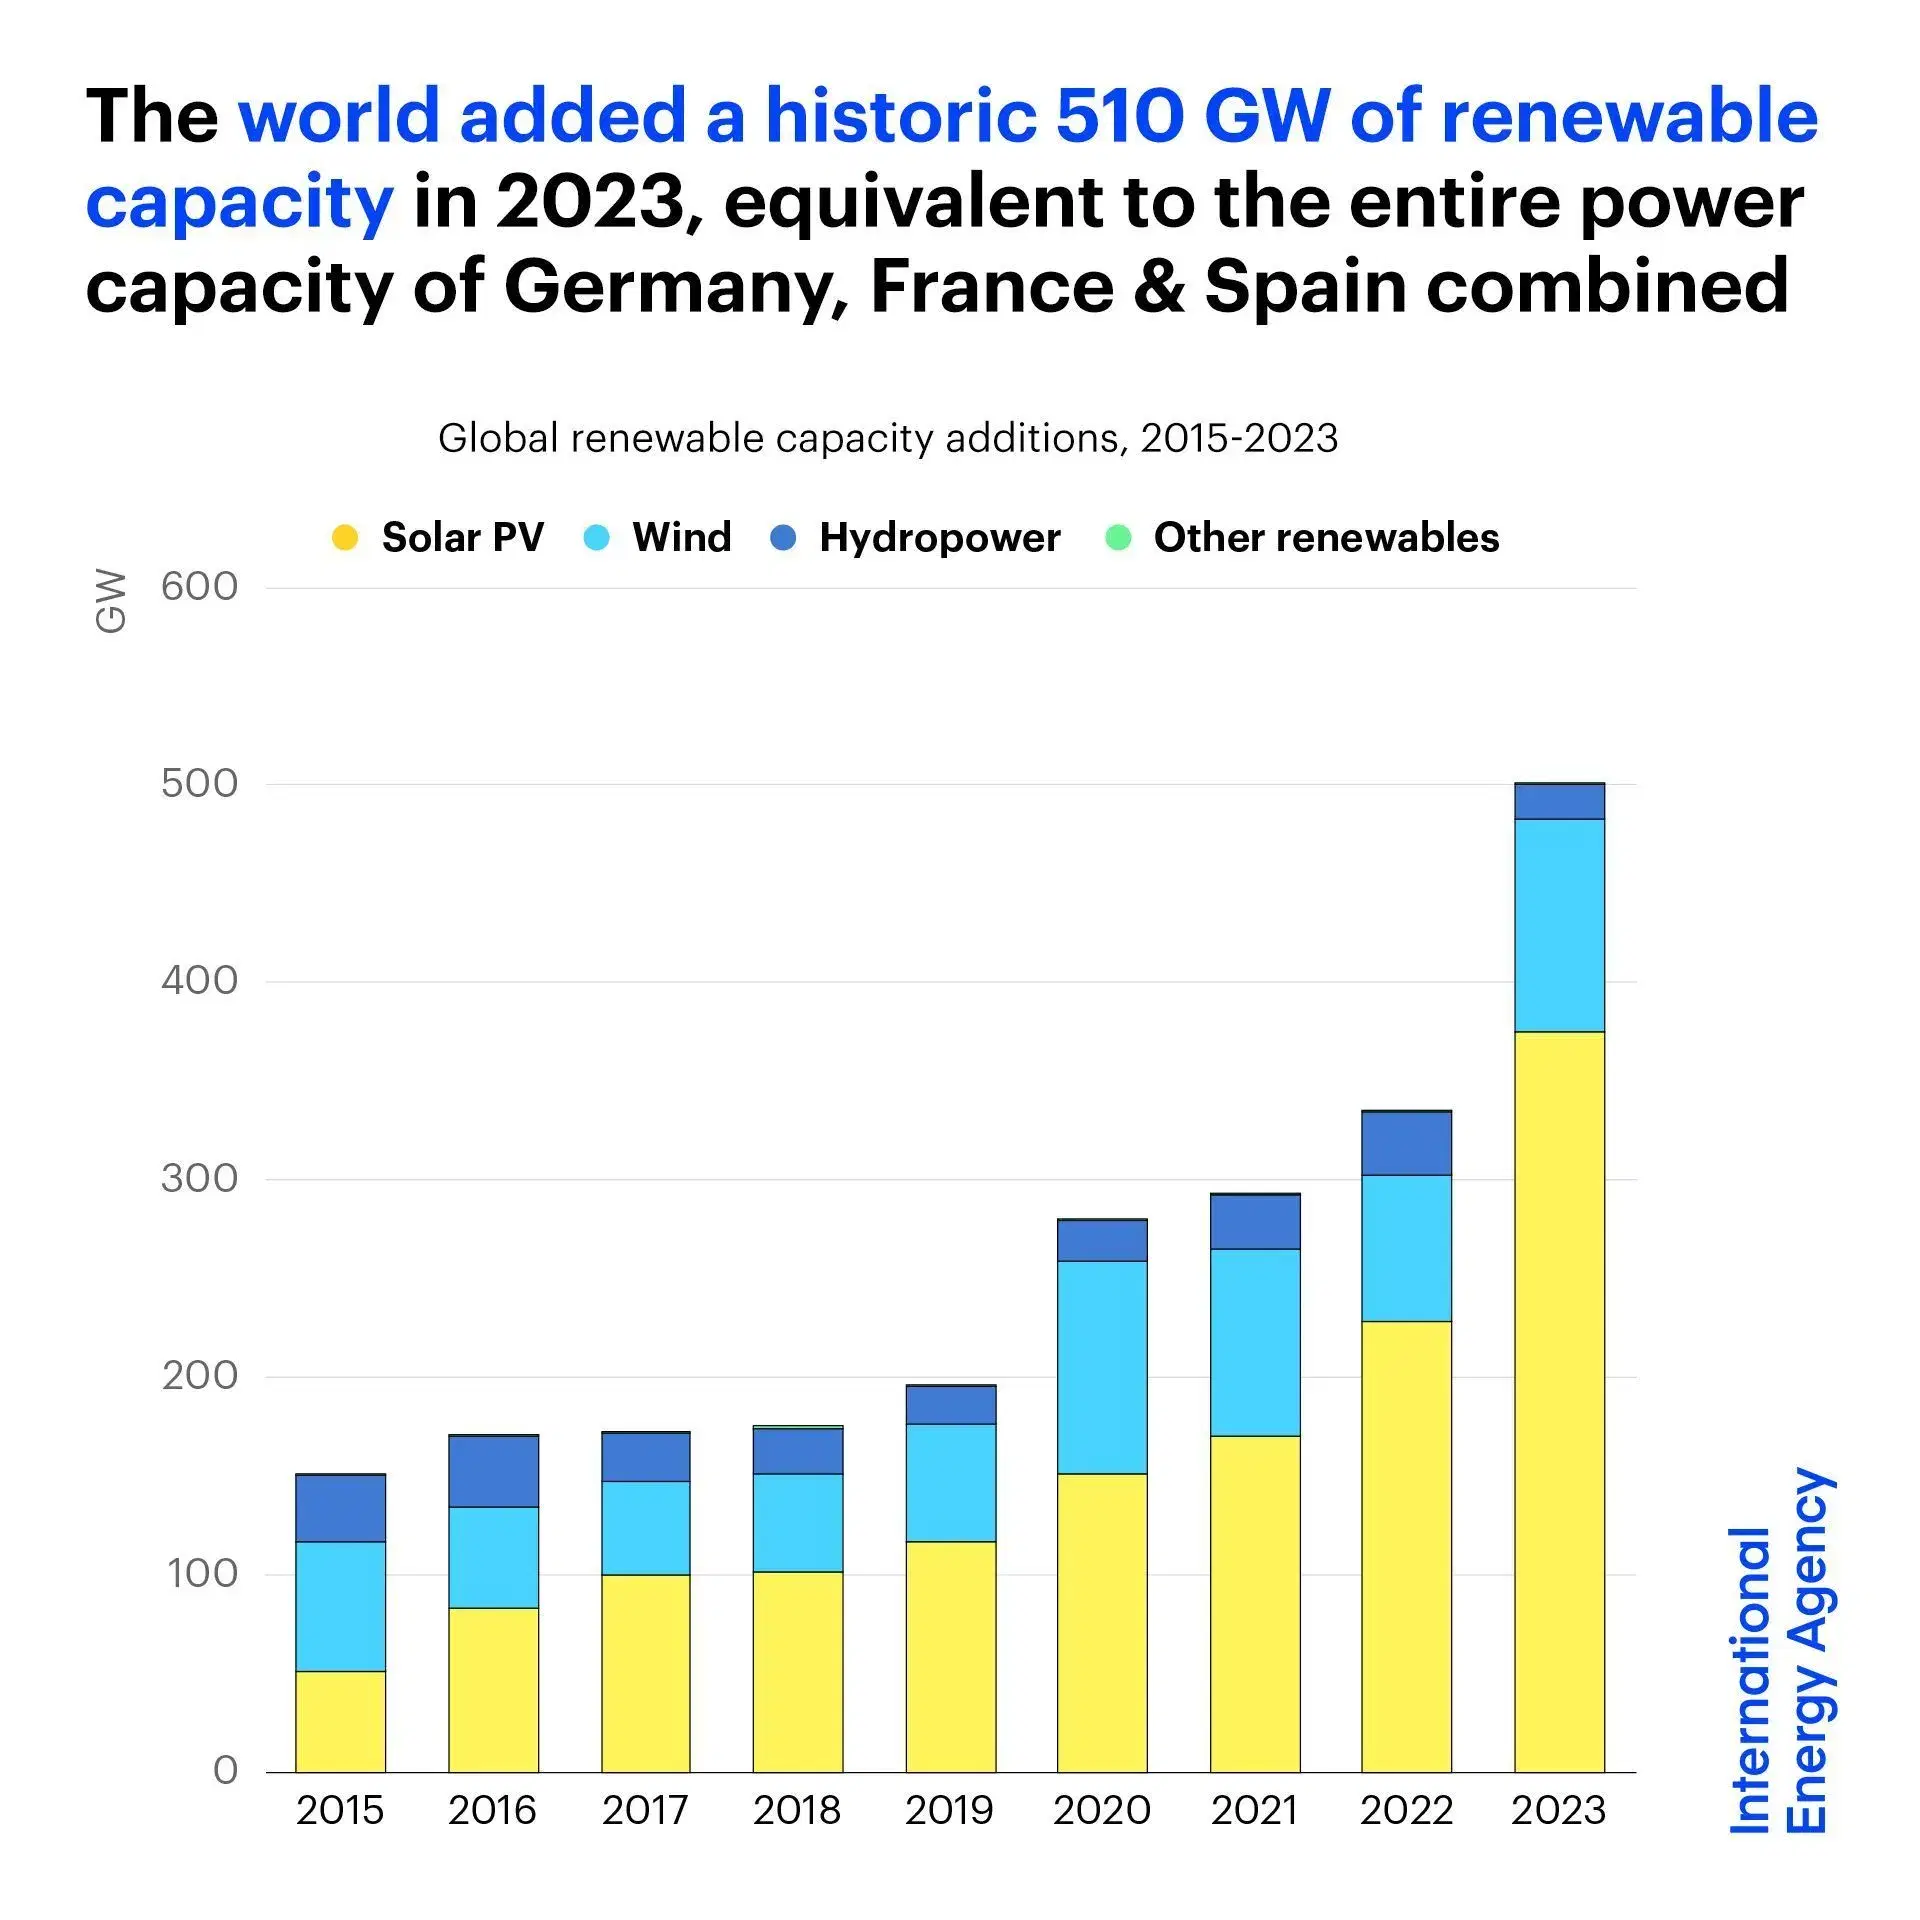 New Renewable Energy Capacity Rose Significantly in 2023